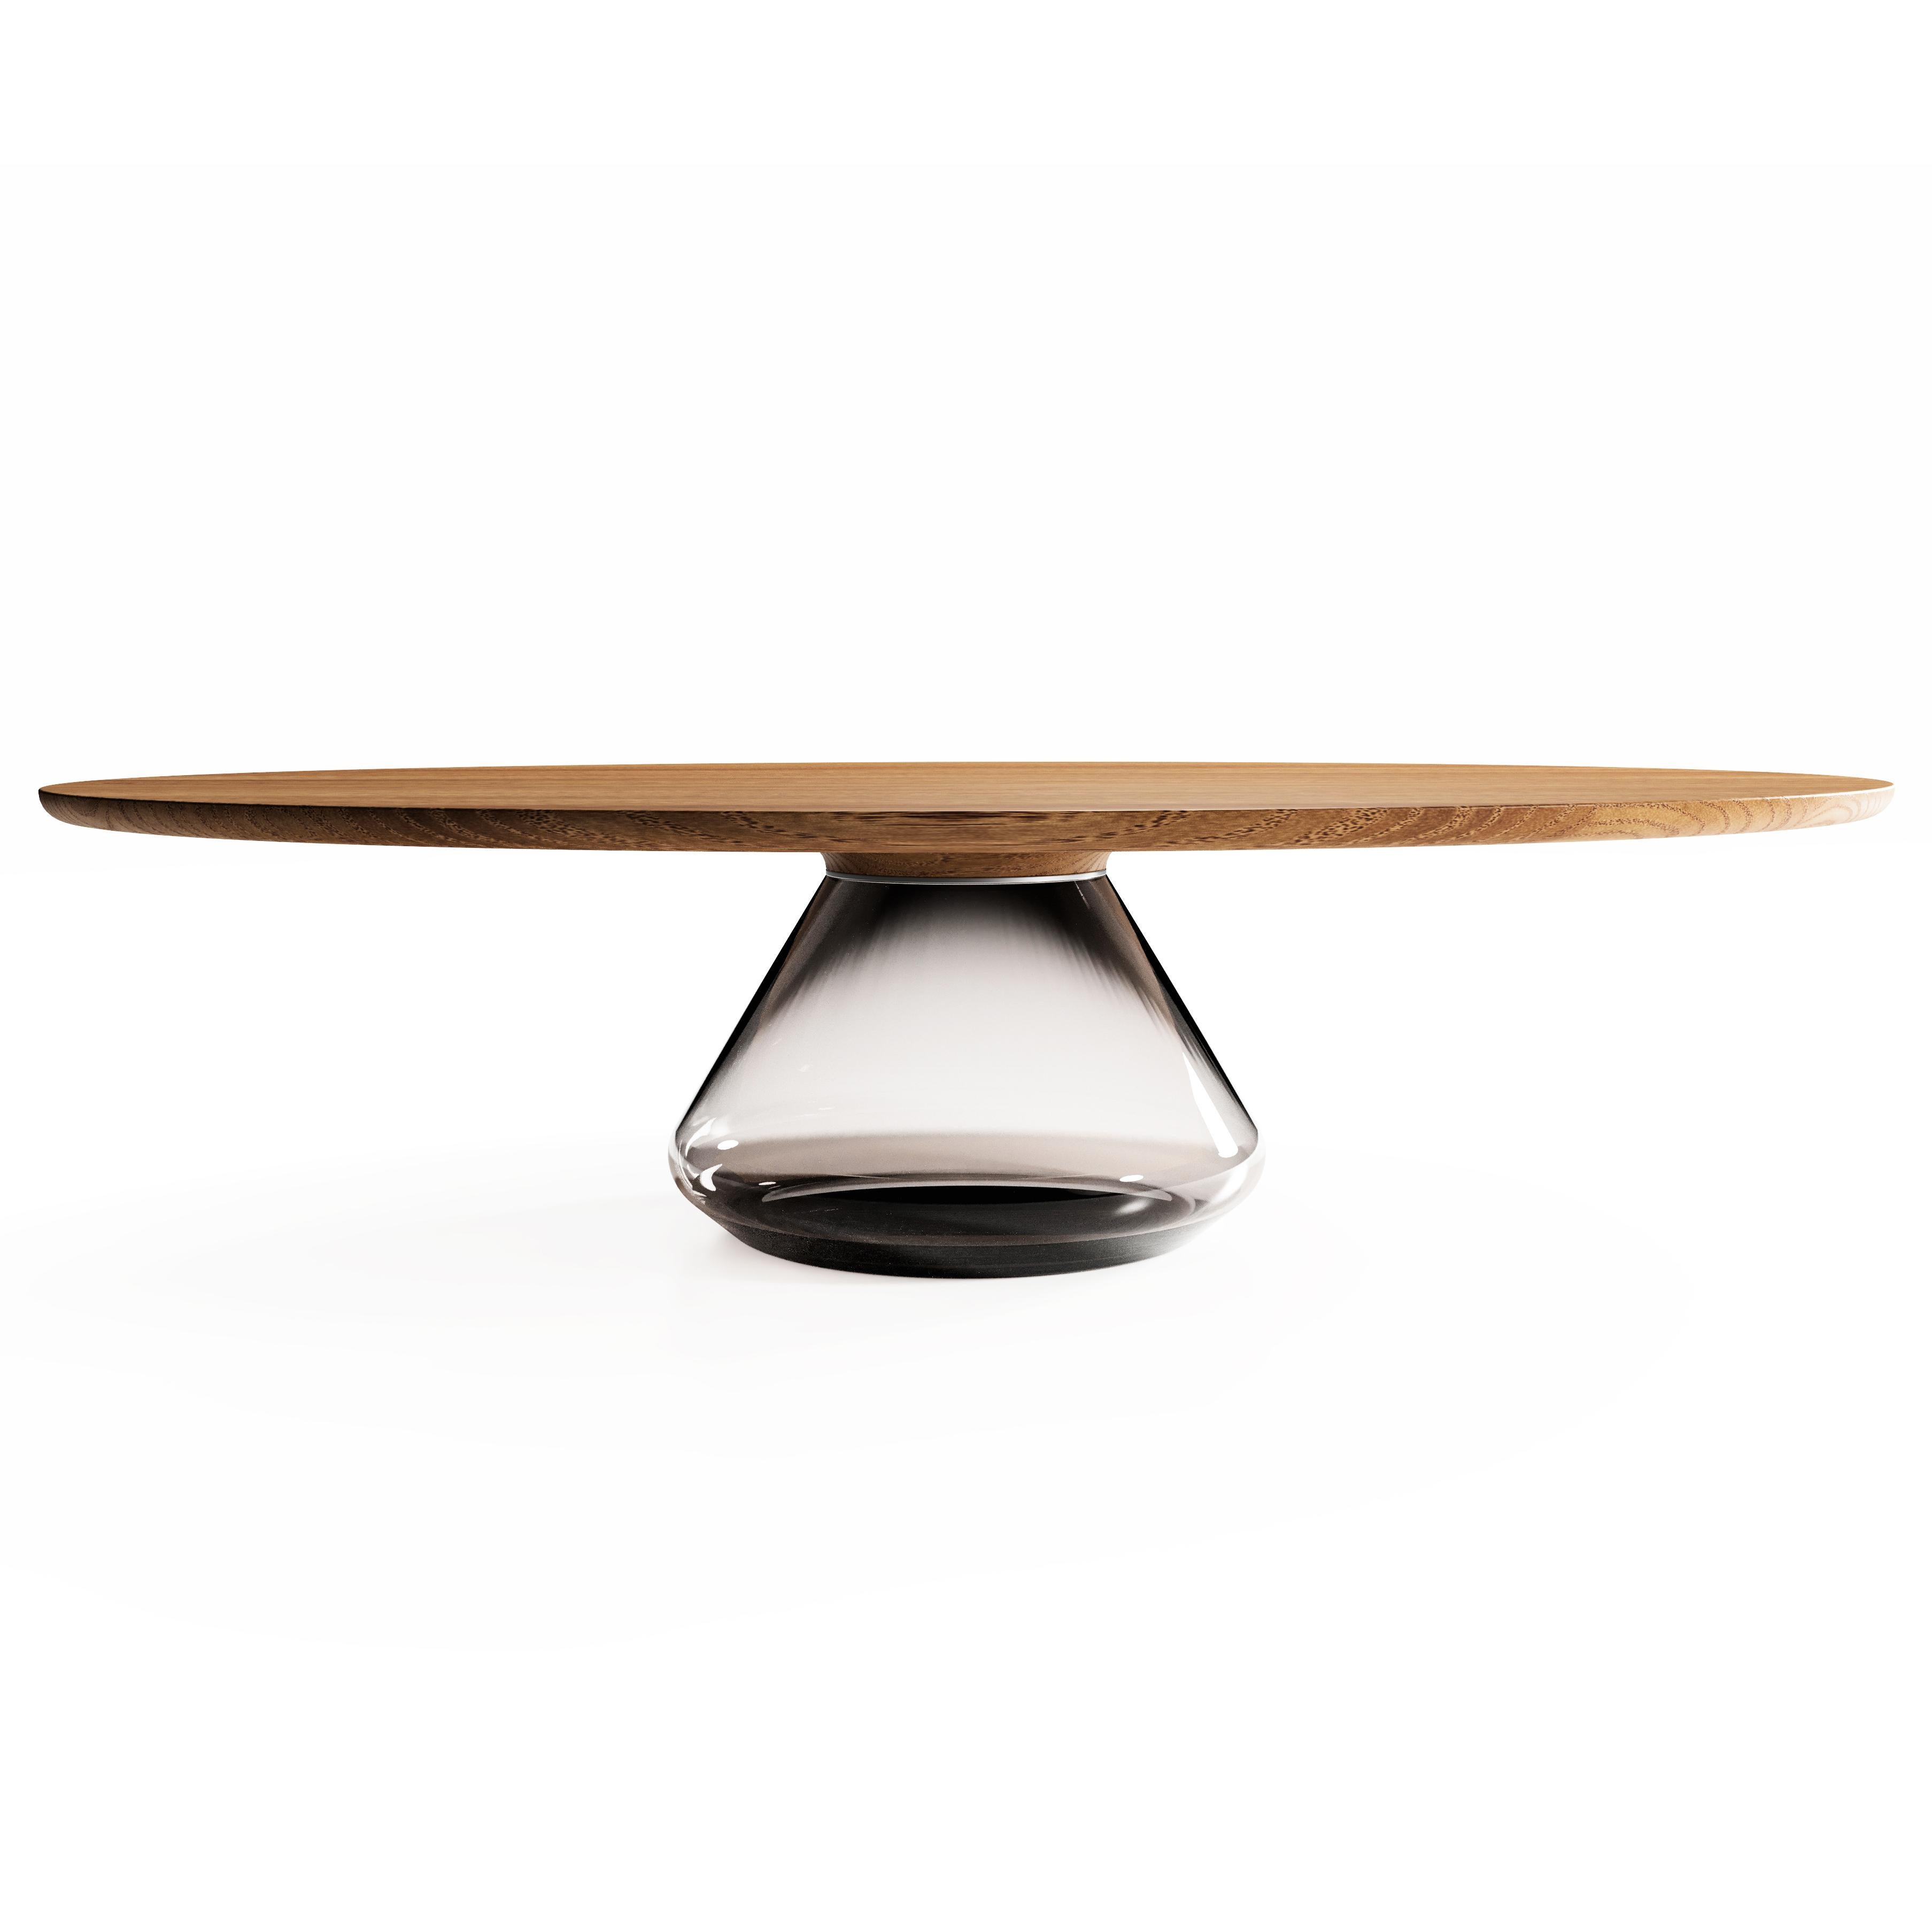 The Smoky Eclipse I, limited edition coffee table by Grzegorz Majka
Limited Edition of 8
Dimensions: 54 x 48 x 14 in
Materials: Glass, oak

The total eclipse of every interior? With this amazing table everything is possible as with its